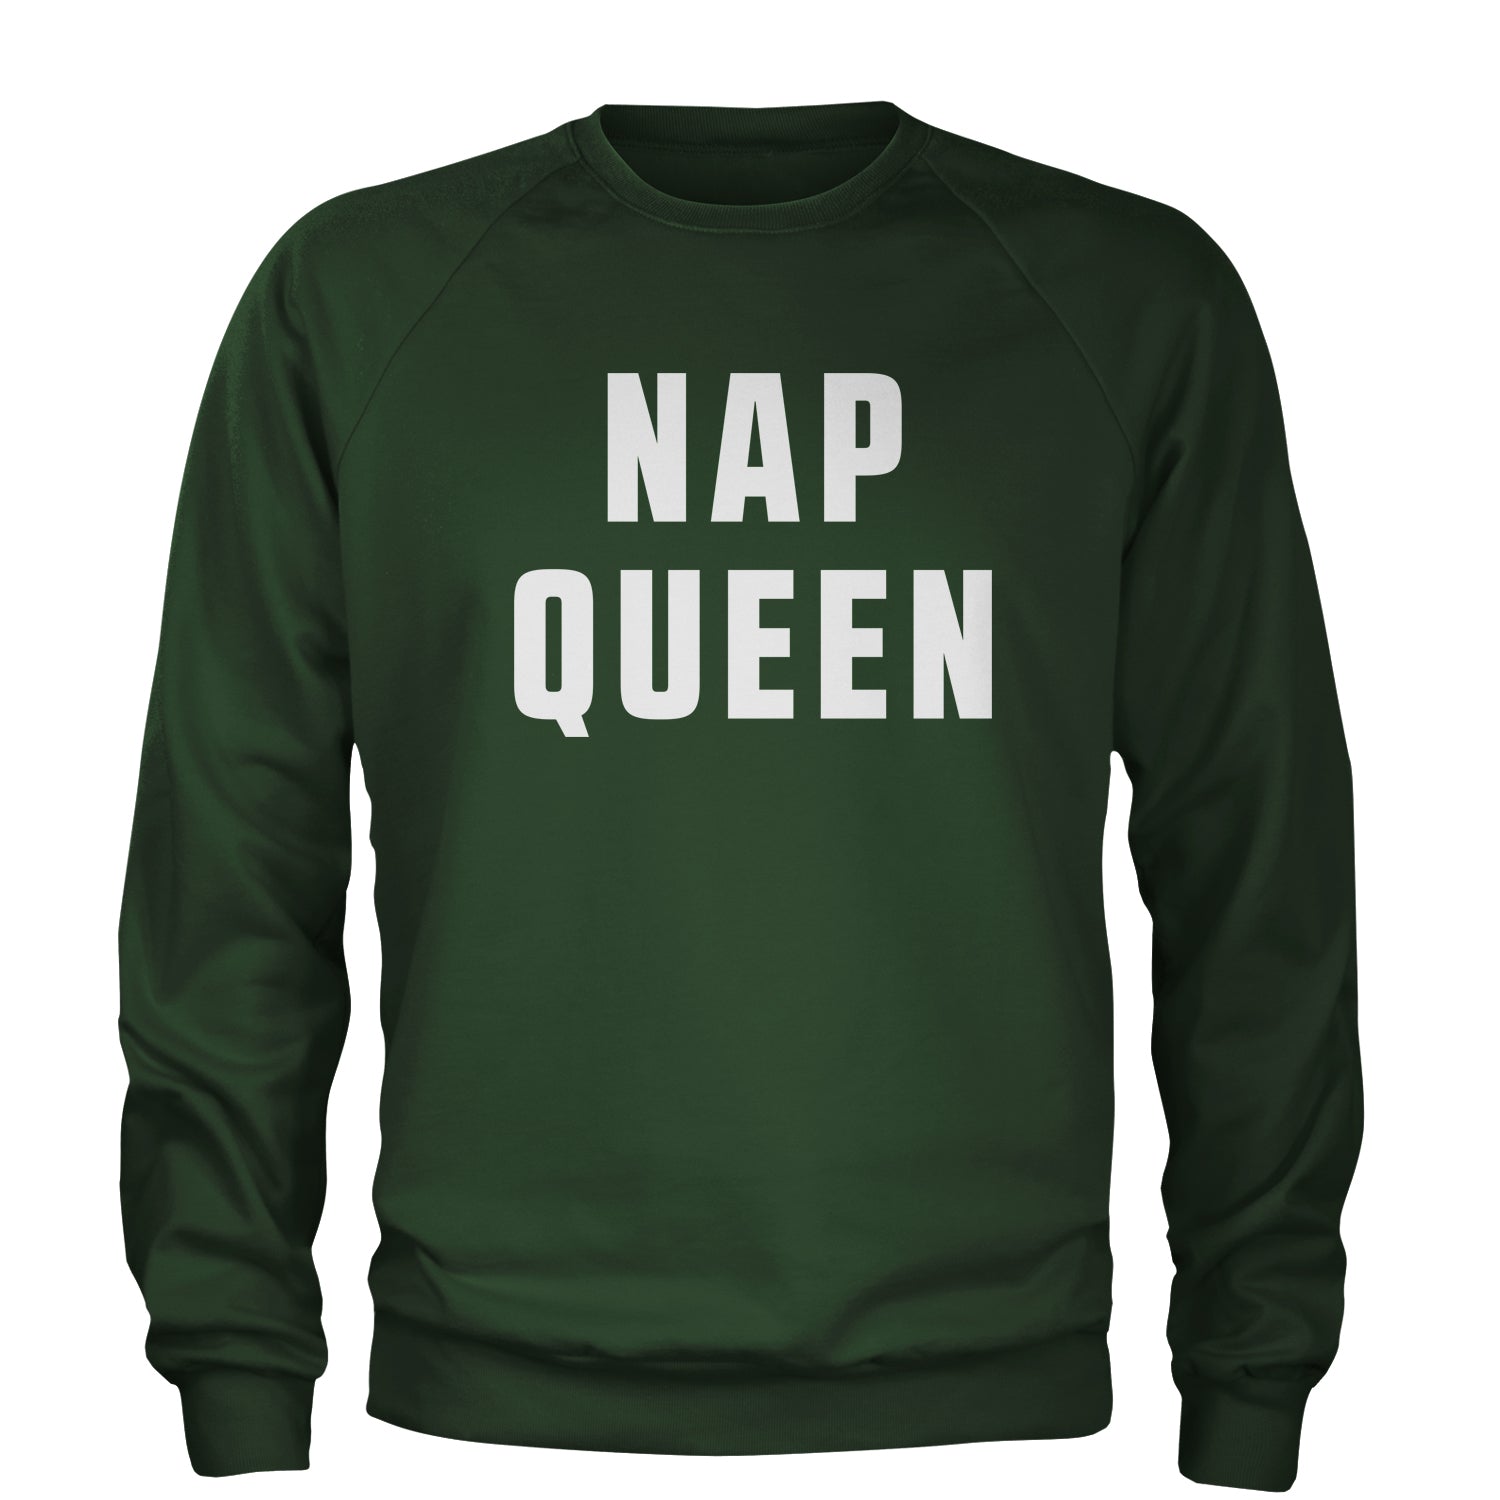 Nap Queen (White Print) Comfy Top For Lazy Days Adult Crewneck Sweatshirt all, day, function, lazy, nap, pajamas, queen, siesta, sleep, tired, to, too by Expression Tees